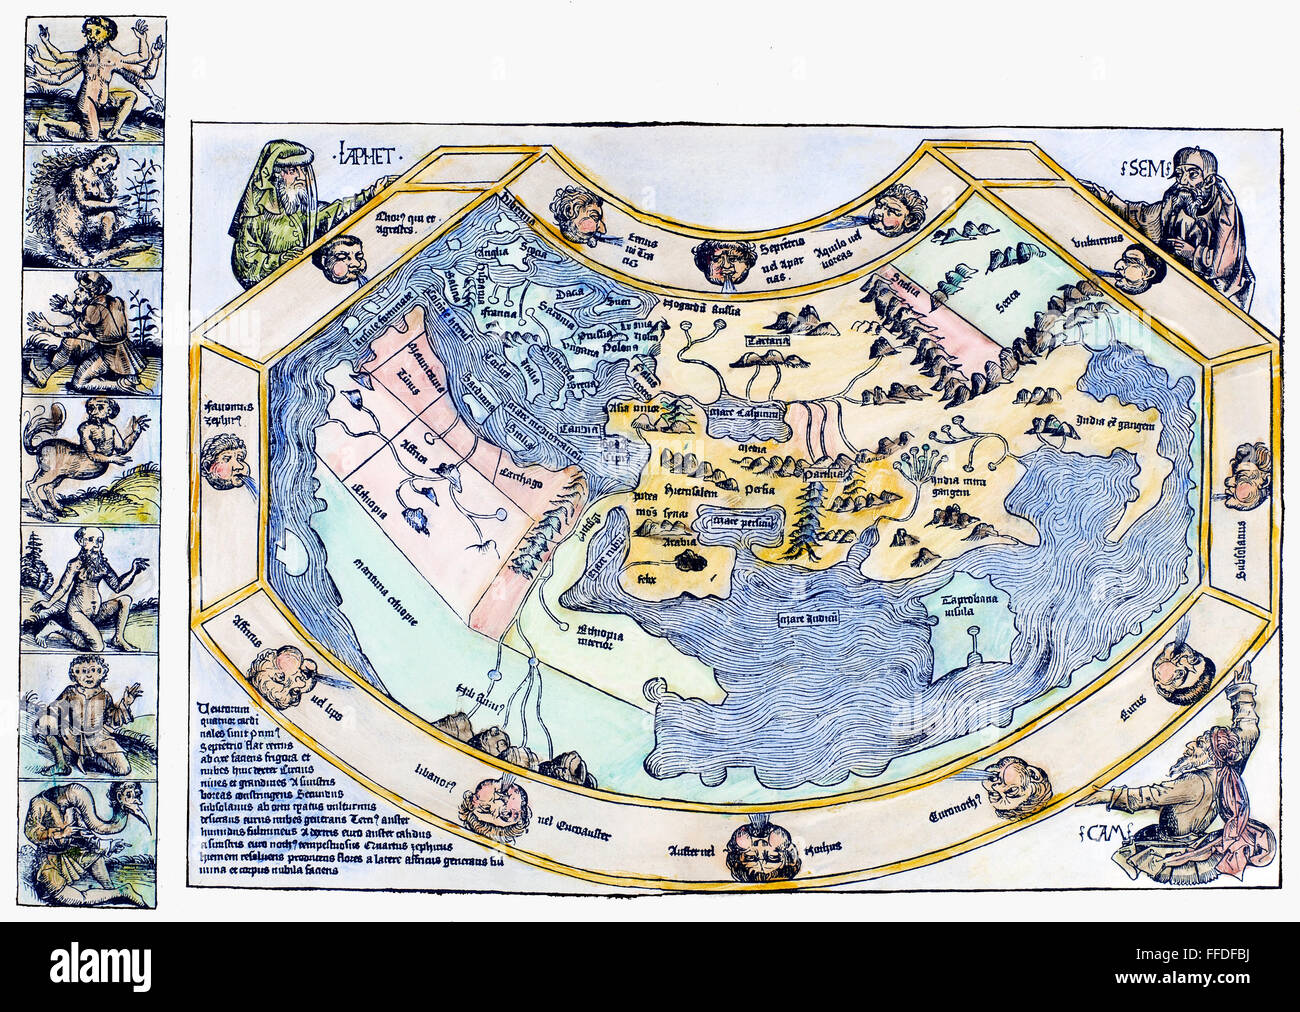 PTOLEMAIC WORLD MAP, 1493. /nPtolemaic world map, including depictions of Noah's sons, Japhet, Shem and Ham, progenitors of the human race in Judeo-Christian tradition. Woodcut from the 'Nuremberg Chronicle,' 1493. Stock Photo